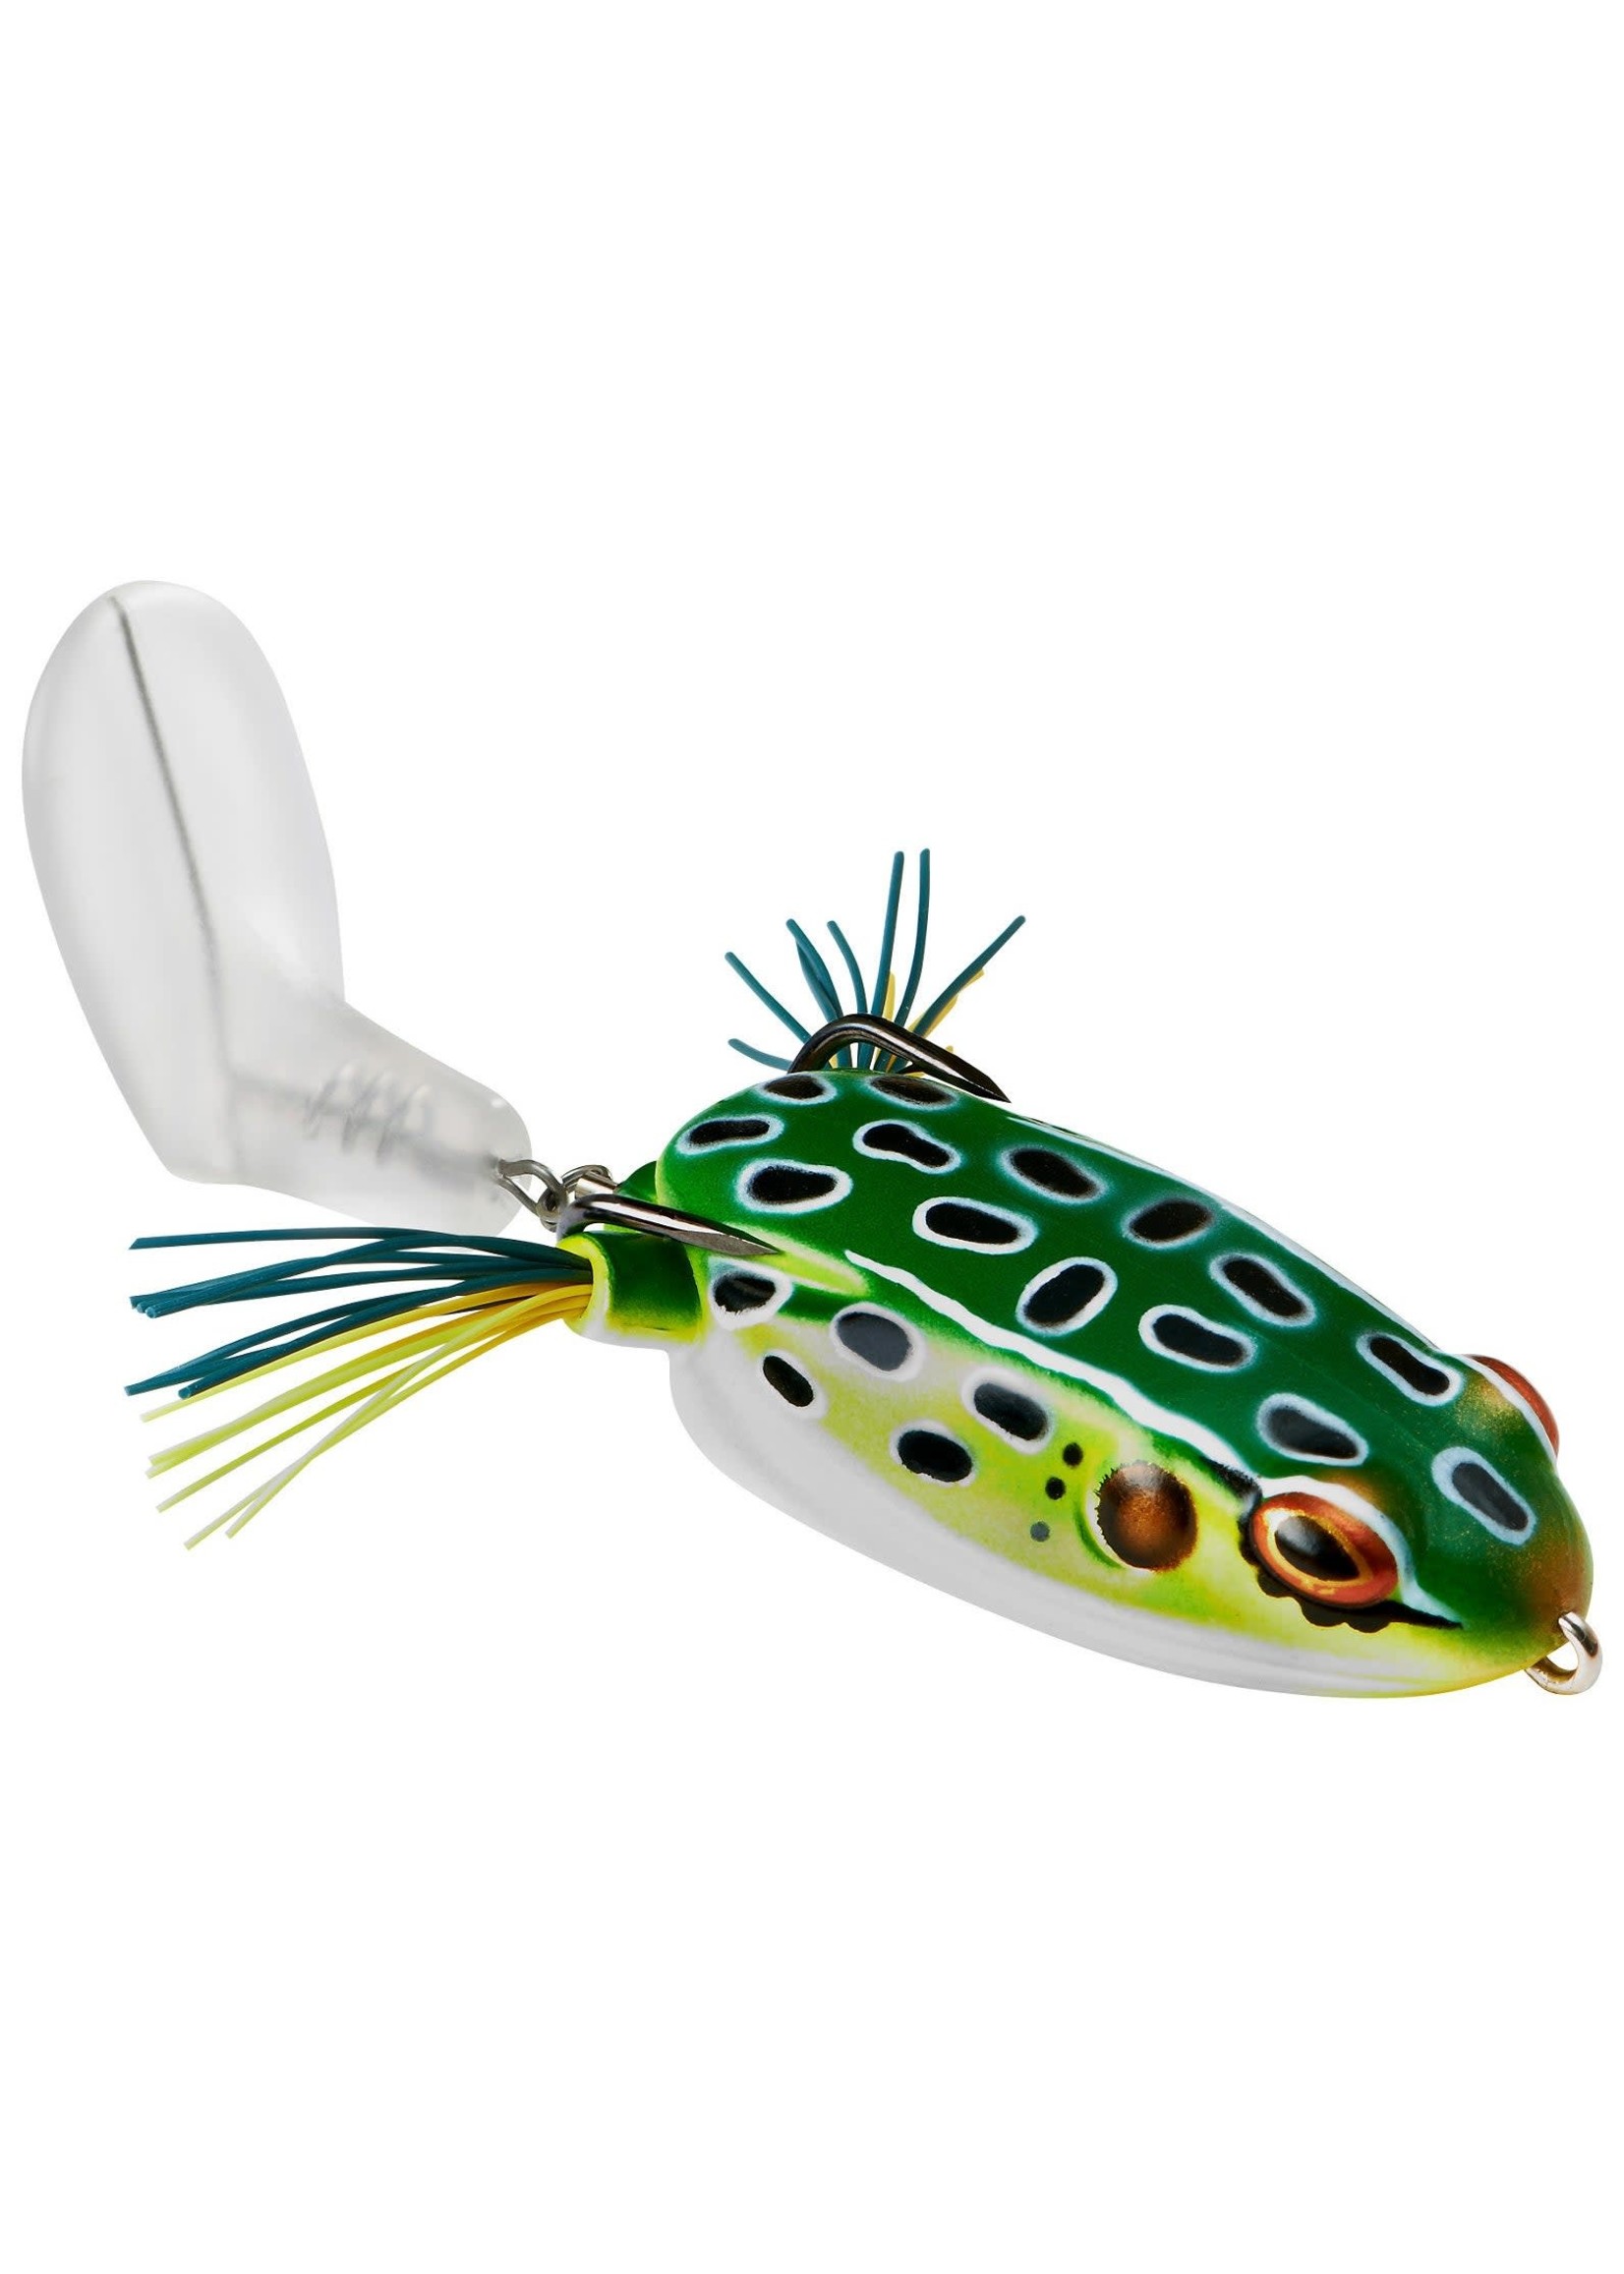 Booyah Bait Company Toad Runner - Leopard